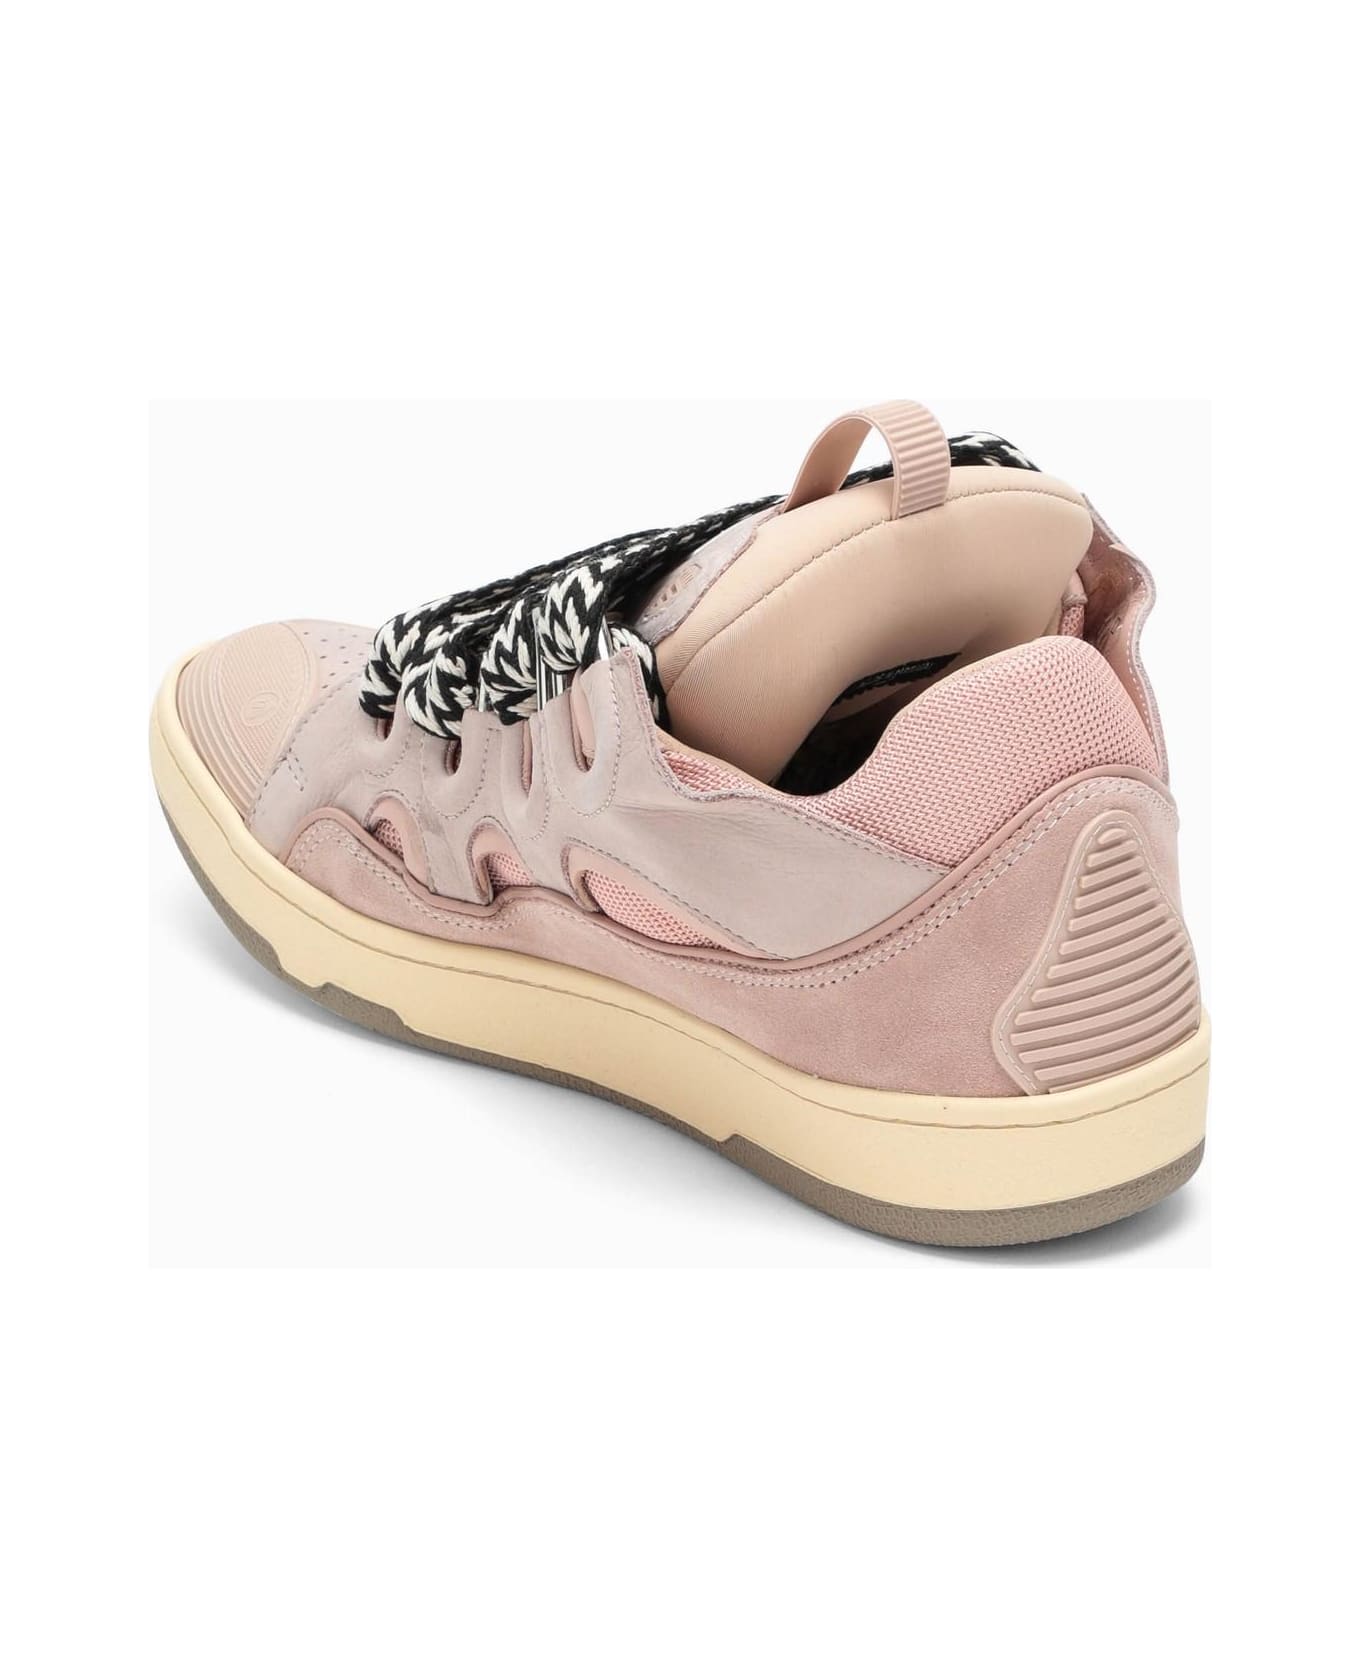 Lanvin Pink Leather Curb Sneakers - Pink スニーカー